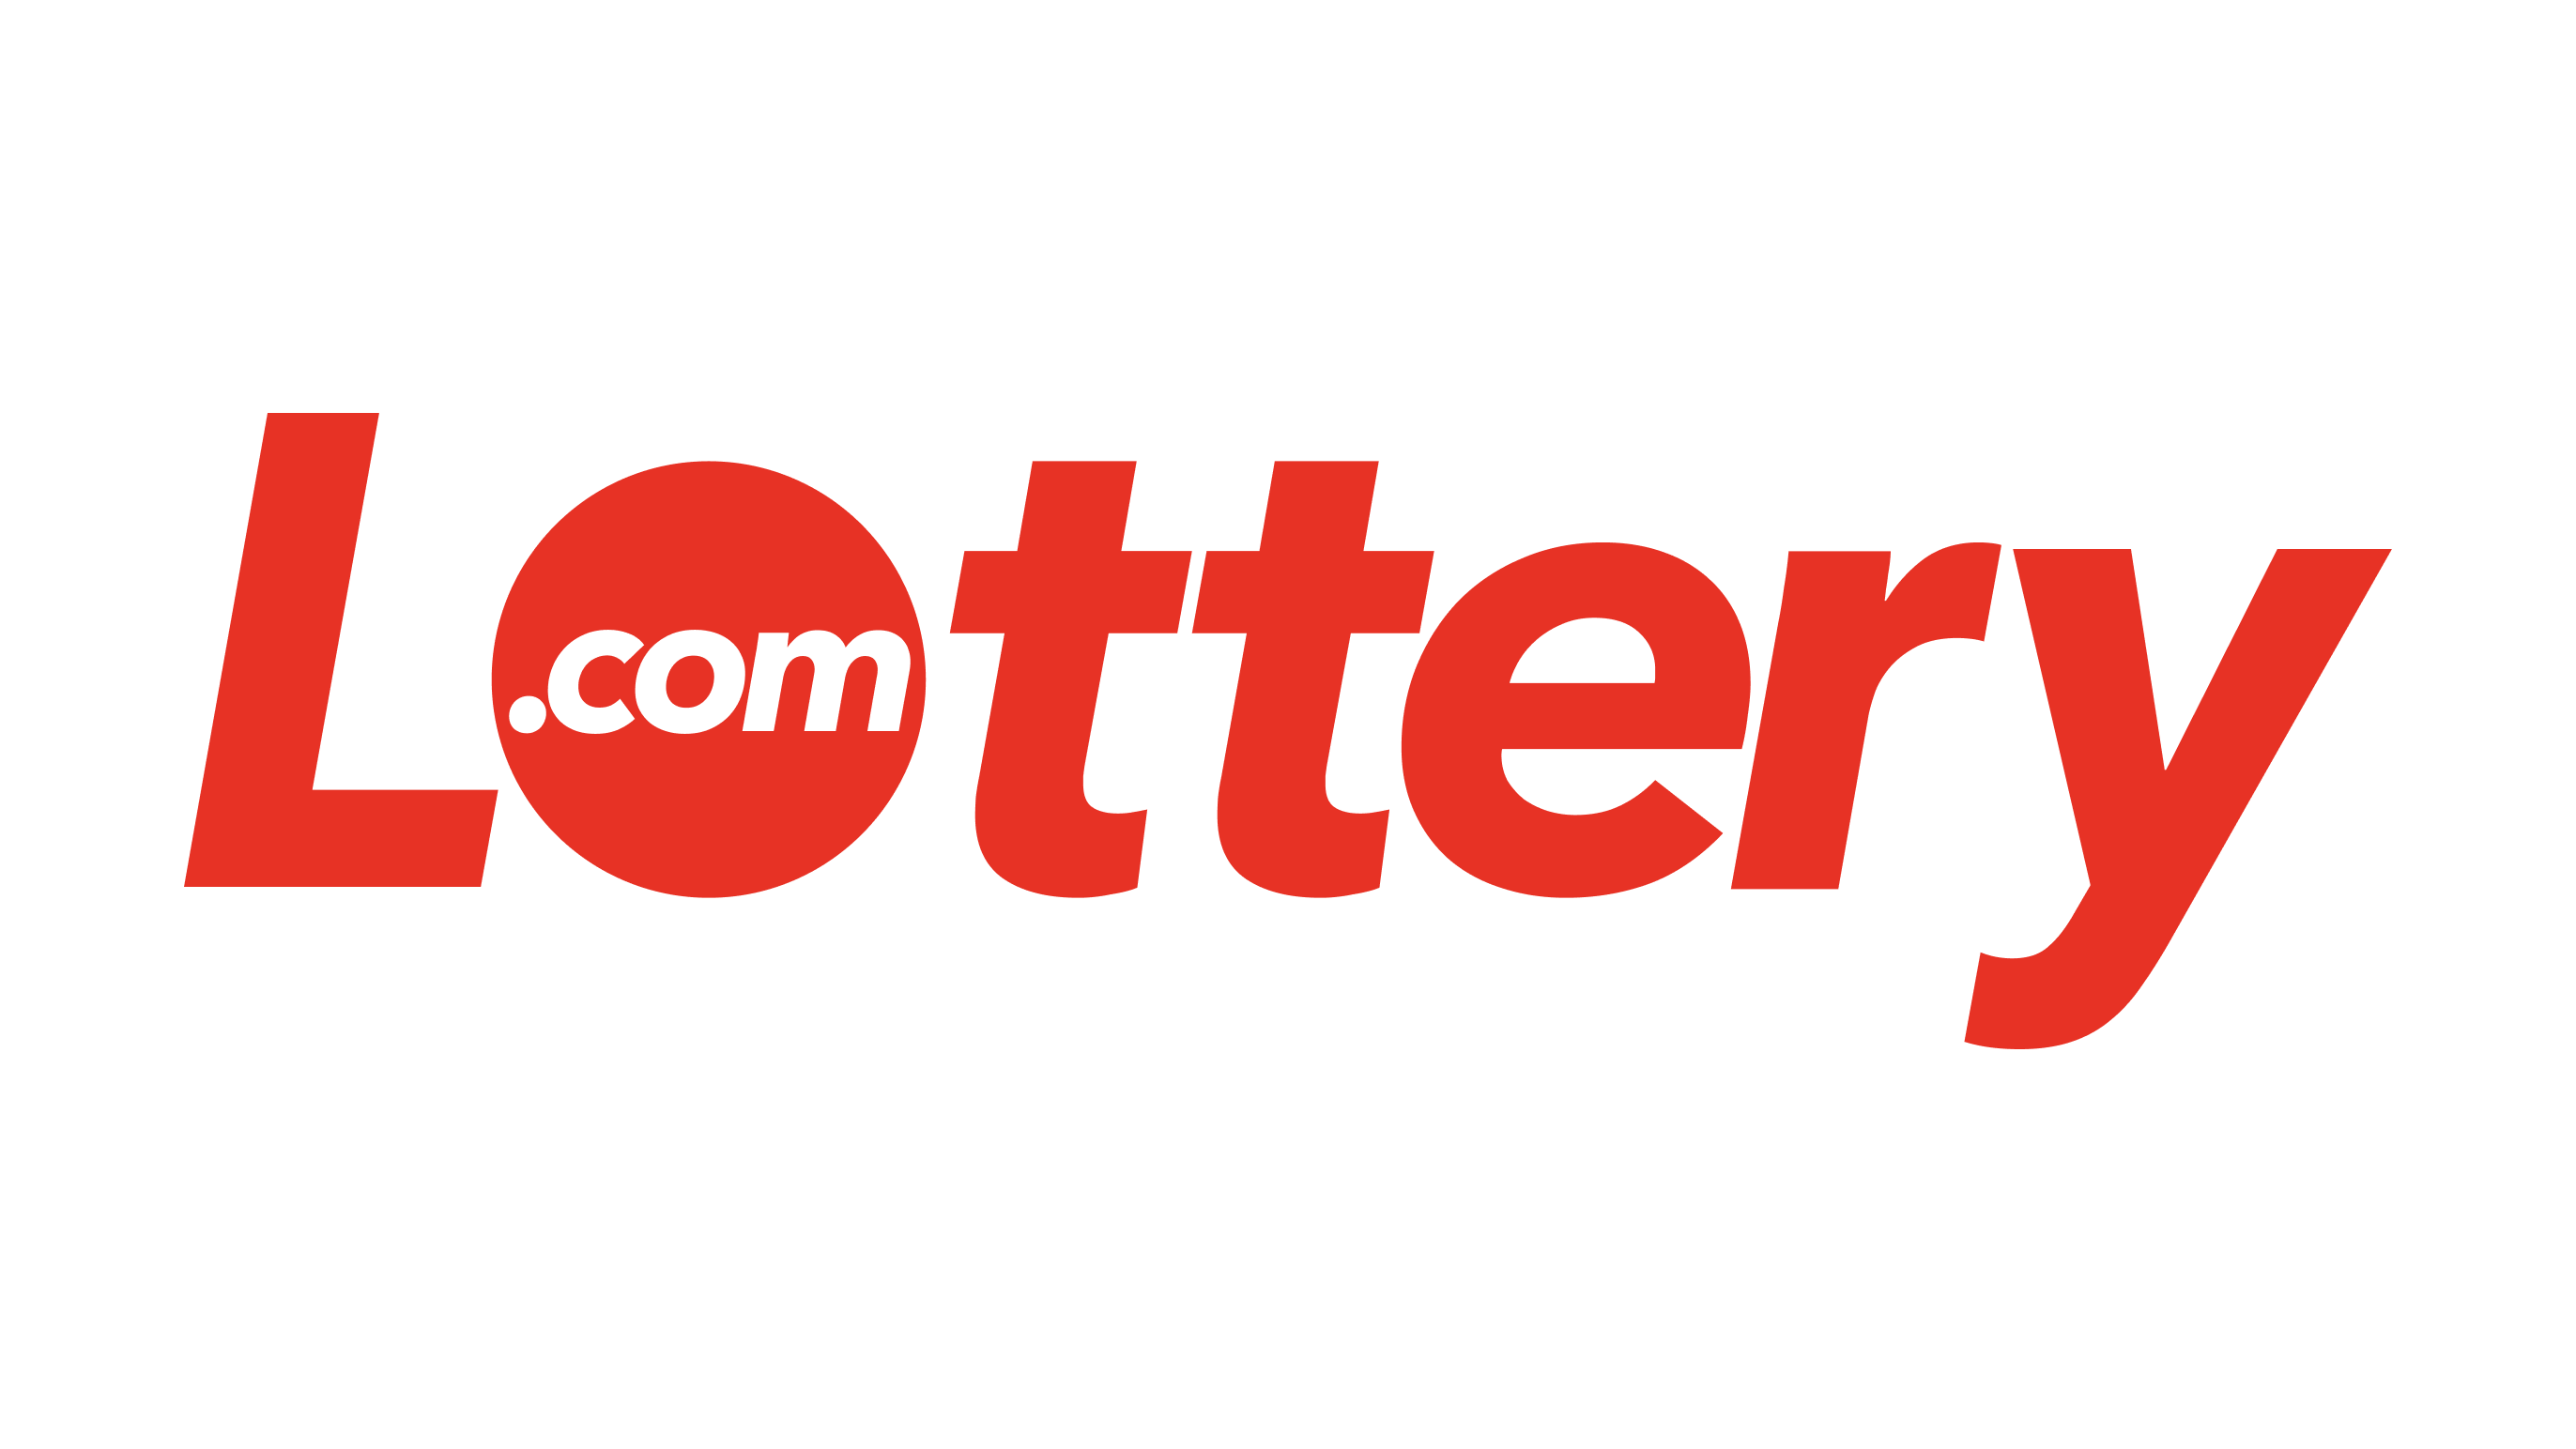 lottery.com-announces-leadership-team-appointments-to-spearhead-global-expansion